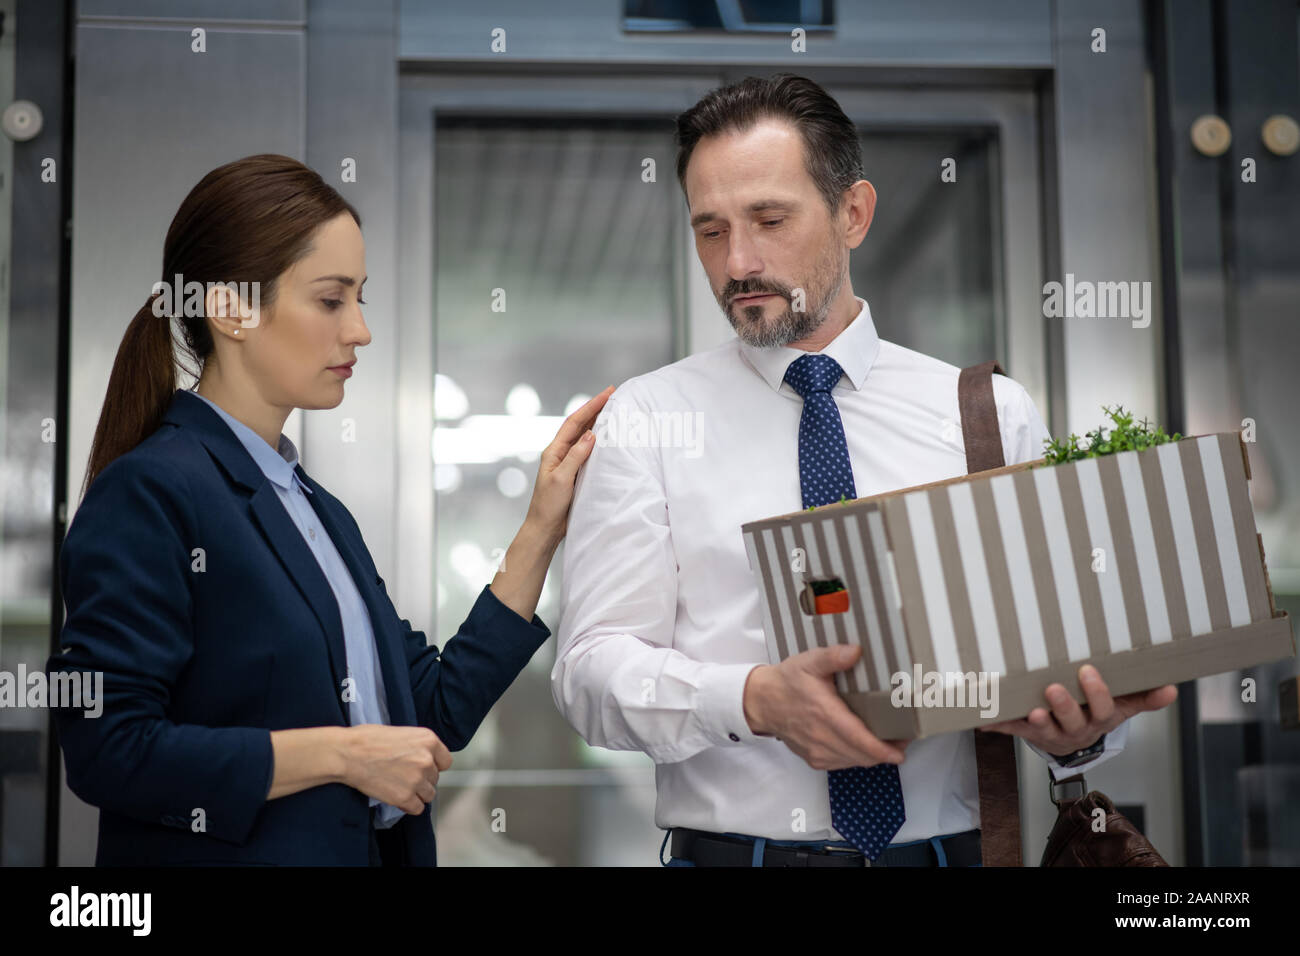 Dark-haired colleague supporting her friend from office after dismissal Stock Photo